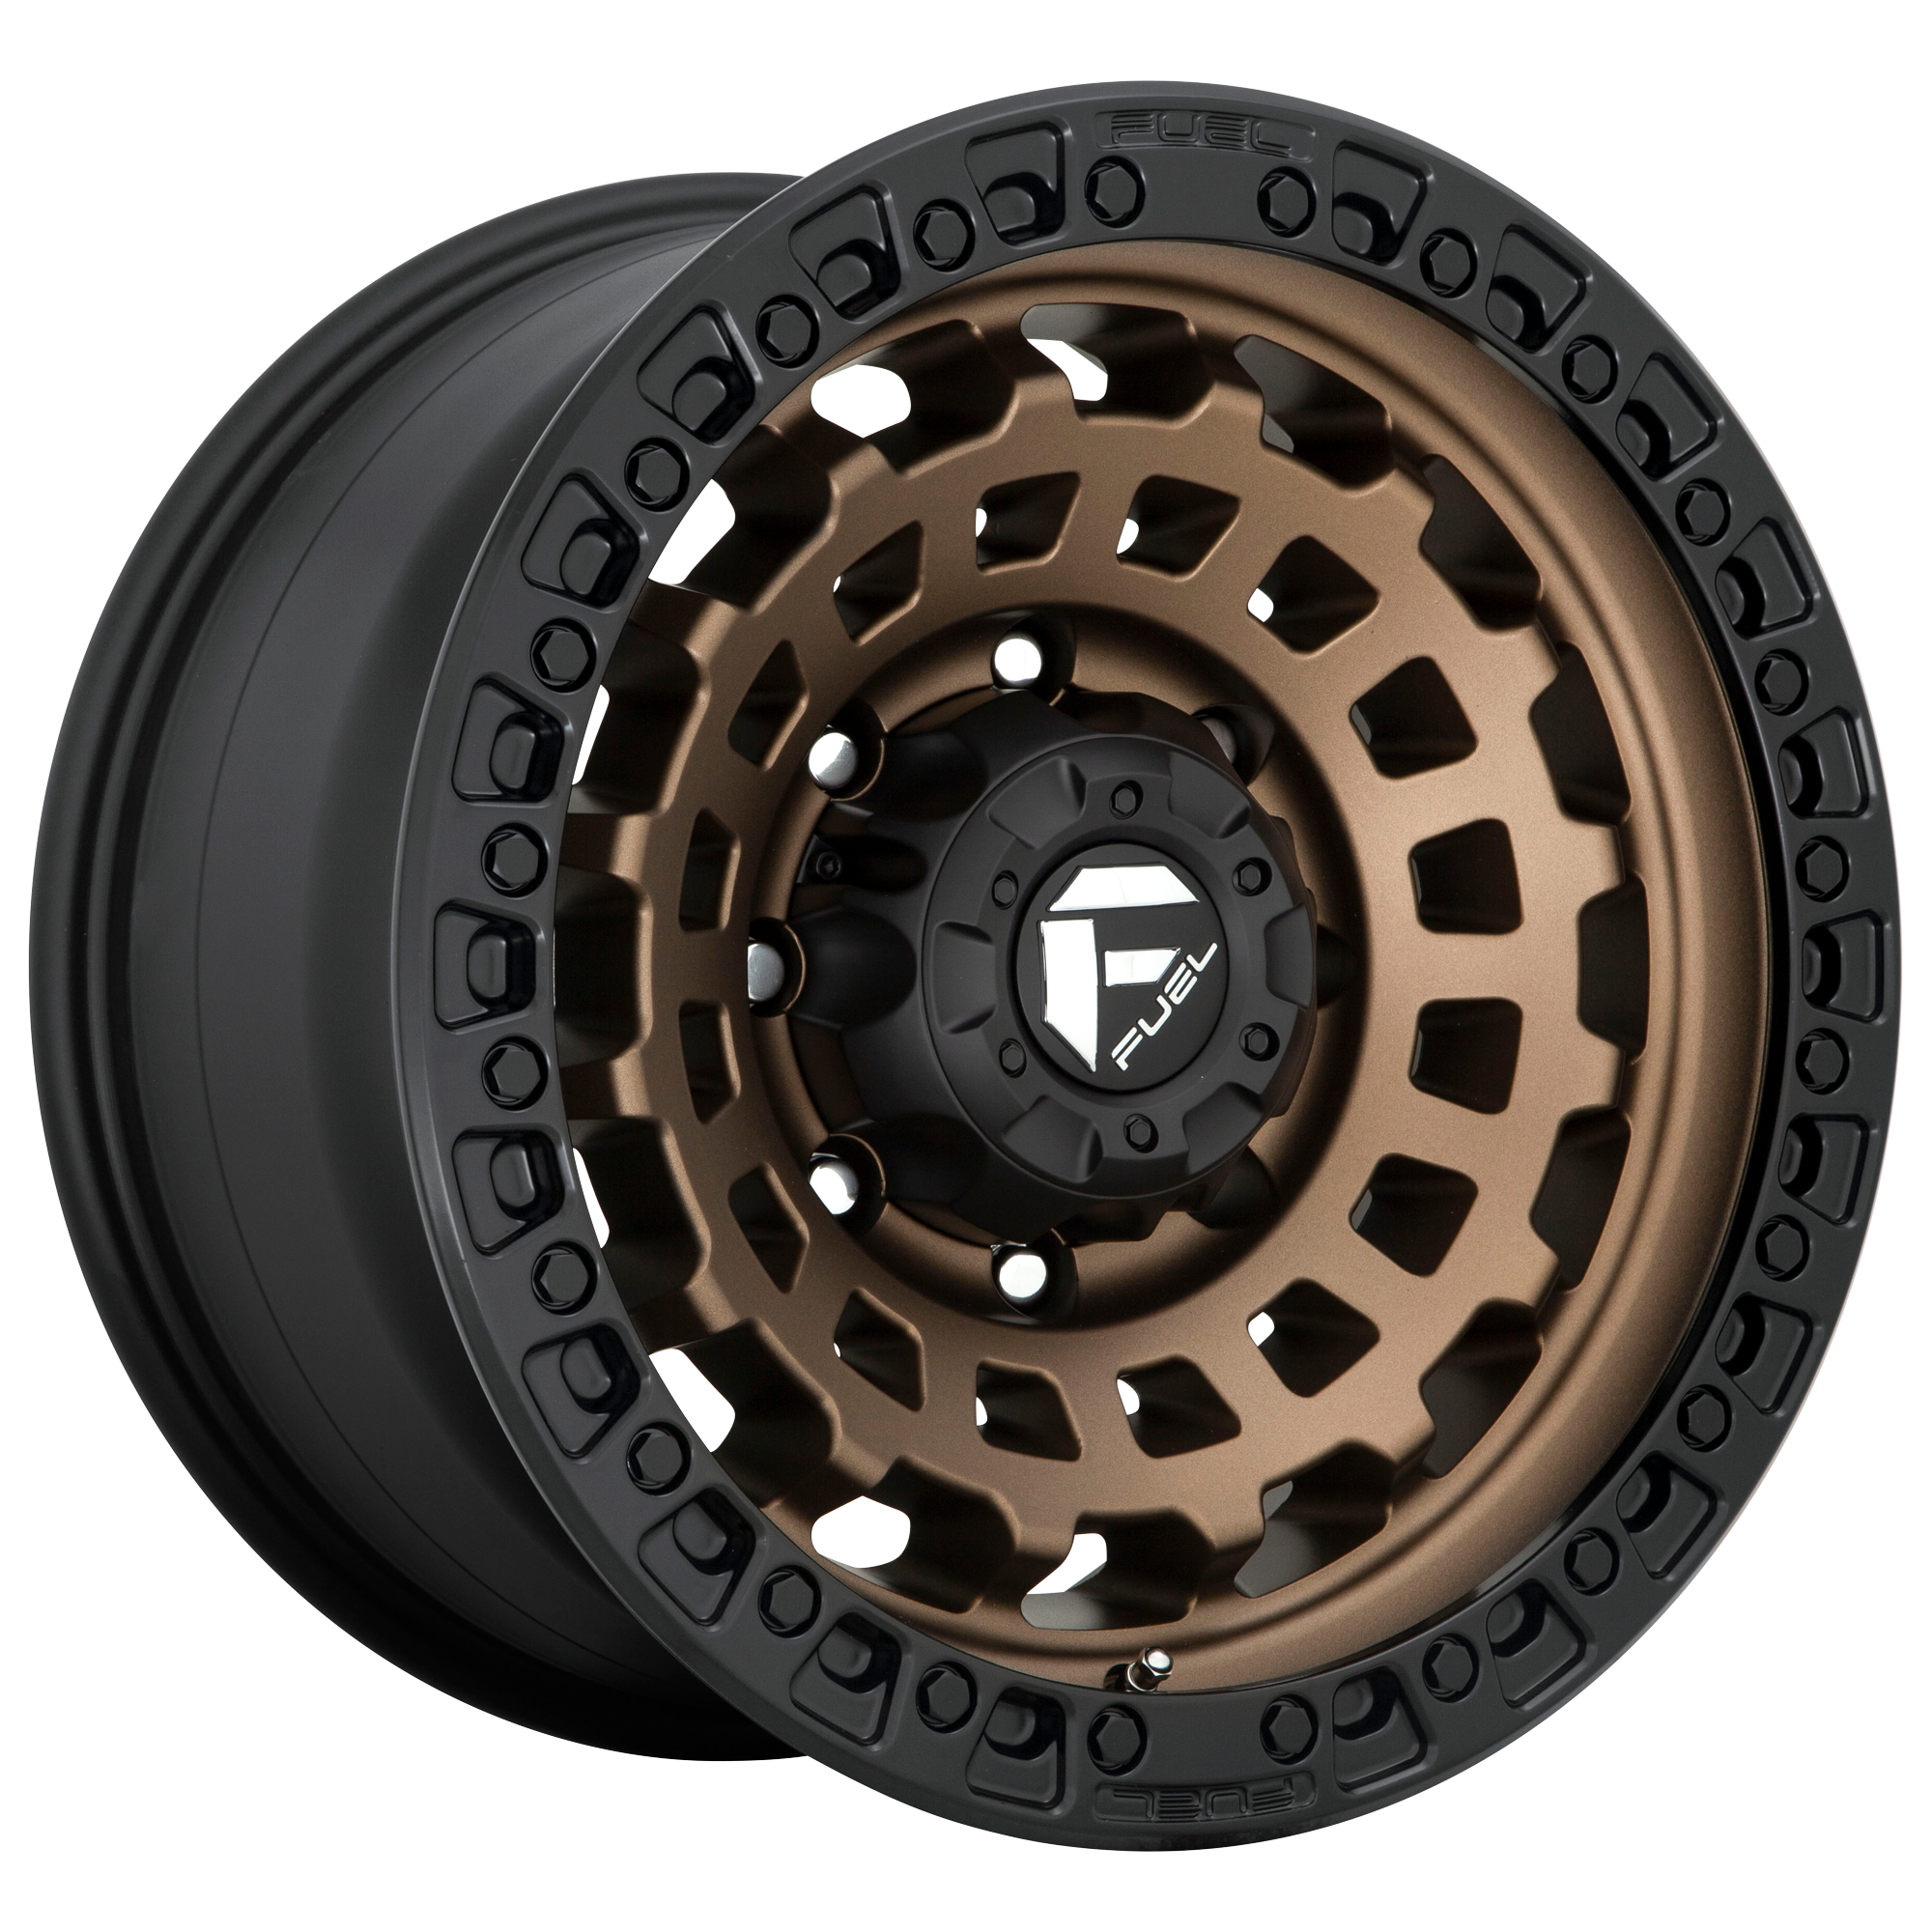 ZEPHYR 18x9 6x135.00 MATTE BRONZE BLACK BEAD RING (1 mm) - Tires and Engine Performance